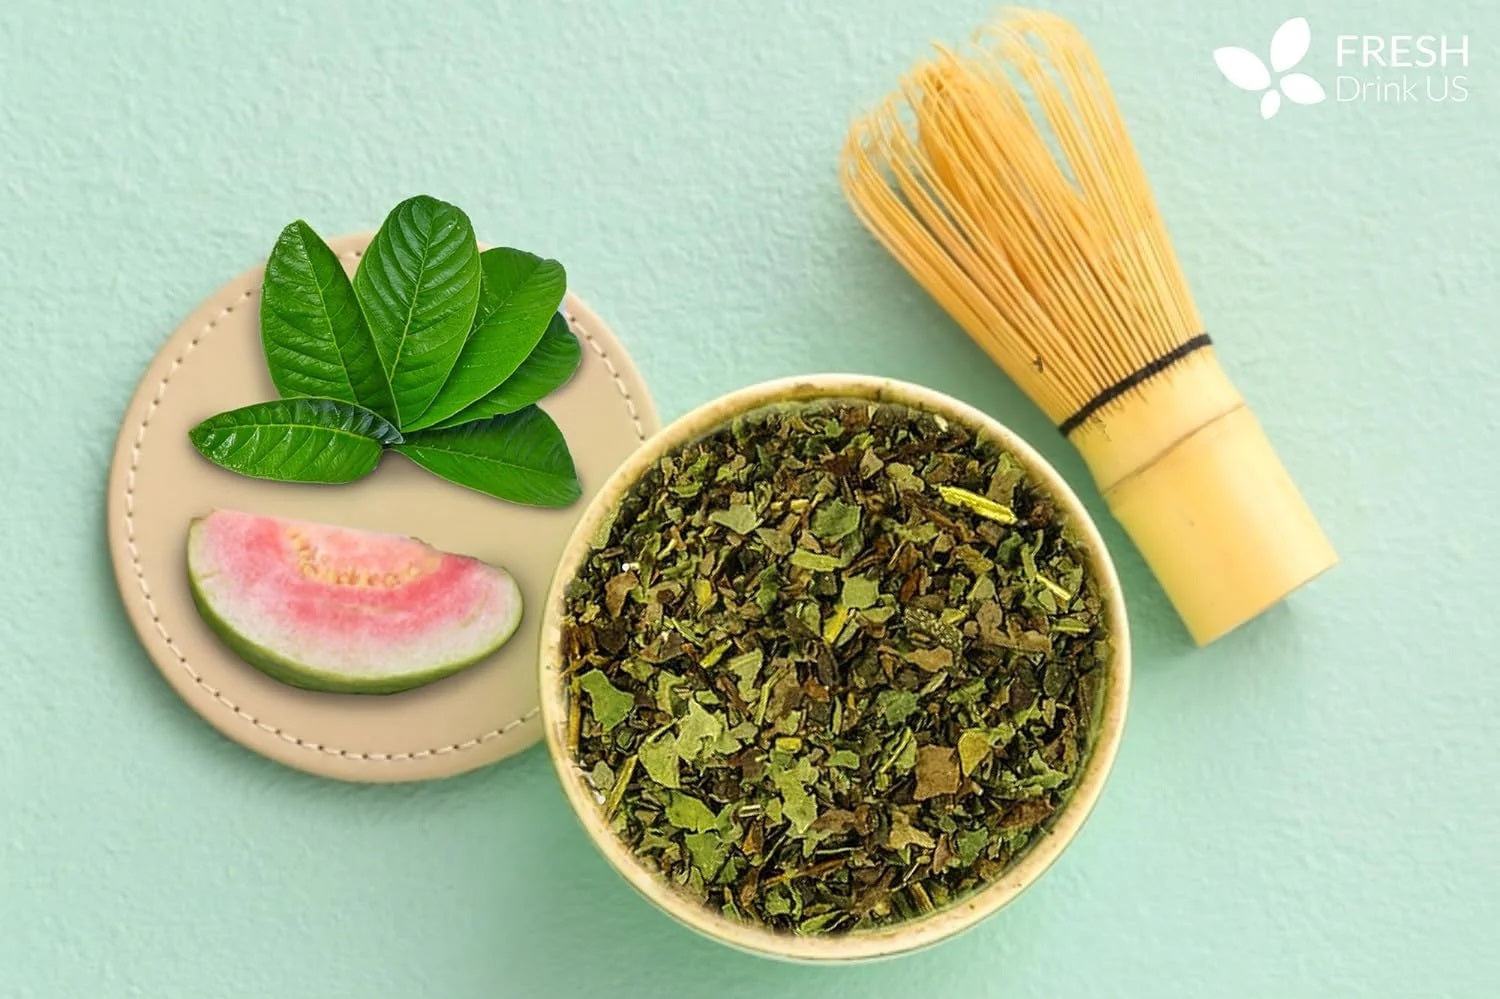 Discover the Health Benefits of Guava Leaves in Your Daily Routine